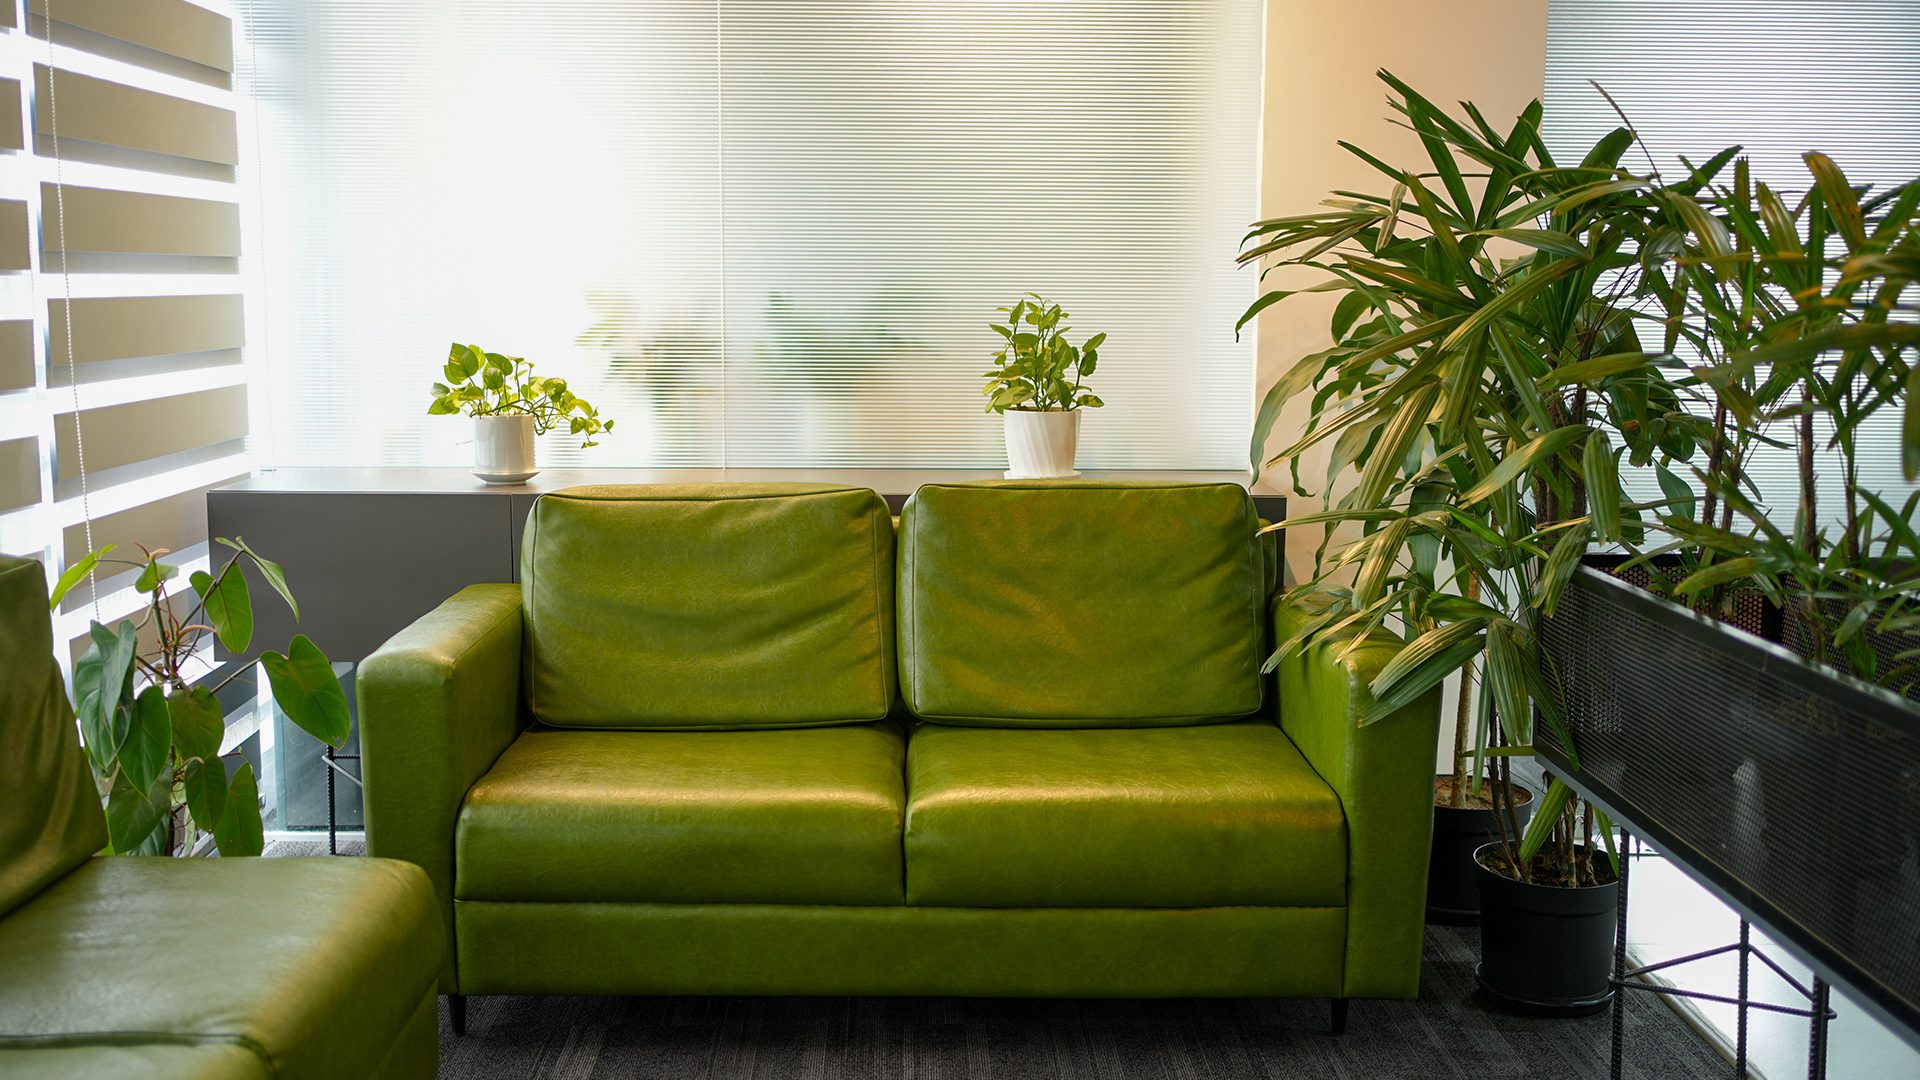 corporate office waiting lounge design